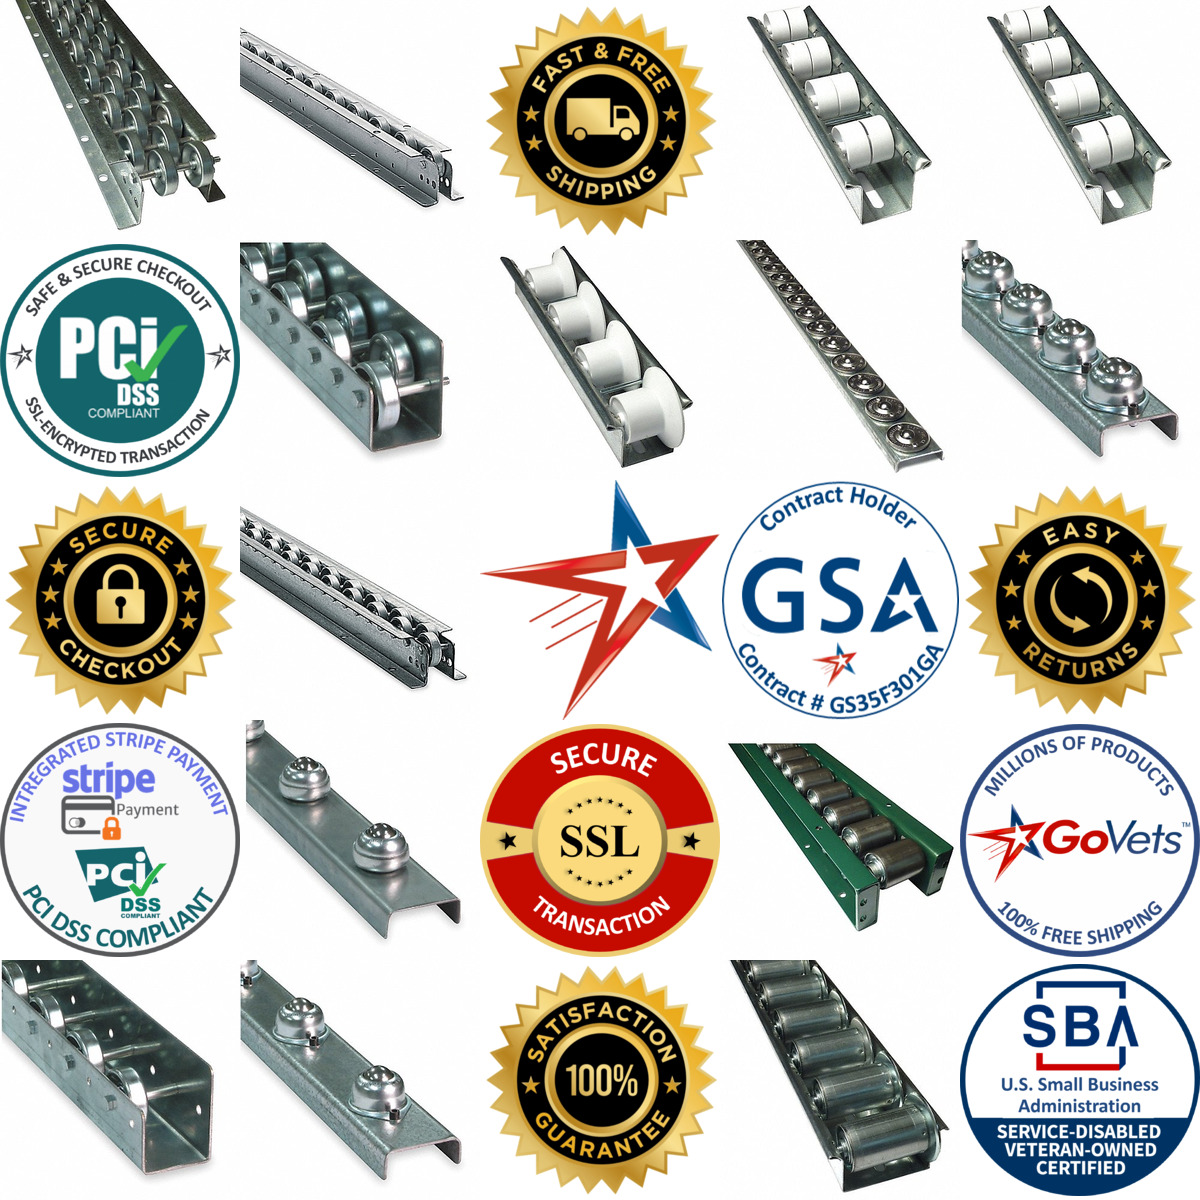 A selection of Flow Rails products on GoVets